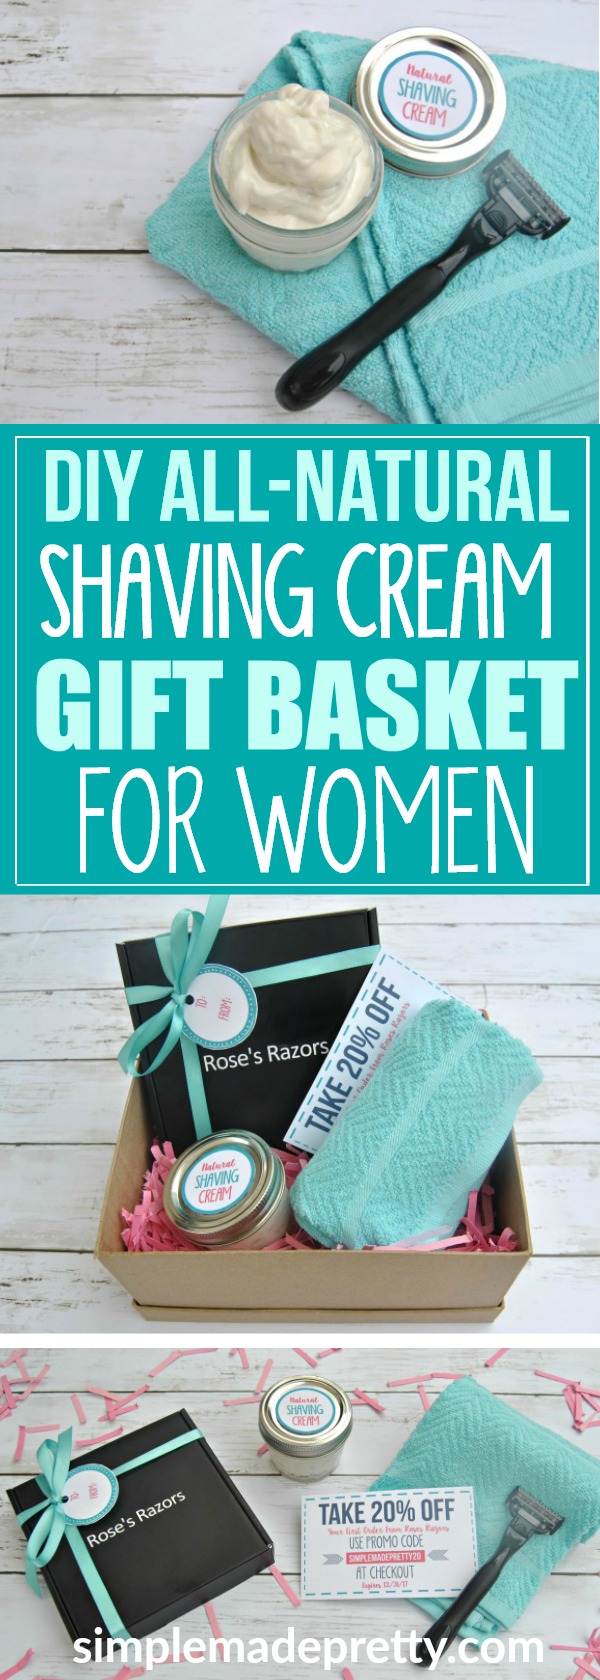 This gift basket idea for women is a thoughtful gift for birthdays, moms, friends, college students, care packages, and Christmas. The DIY shaving cream recipe has natural ingredients, including shea butter, coconut oil, and Young Living essential oils. The razors featured in this gift basket are from Roses Razors and are one of the best razors for women shaving that I've used. This frugal living DIY craft is easy for teen girls and the razors are gentle on skin.